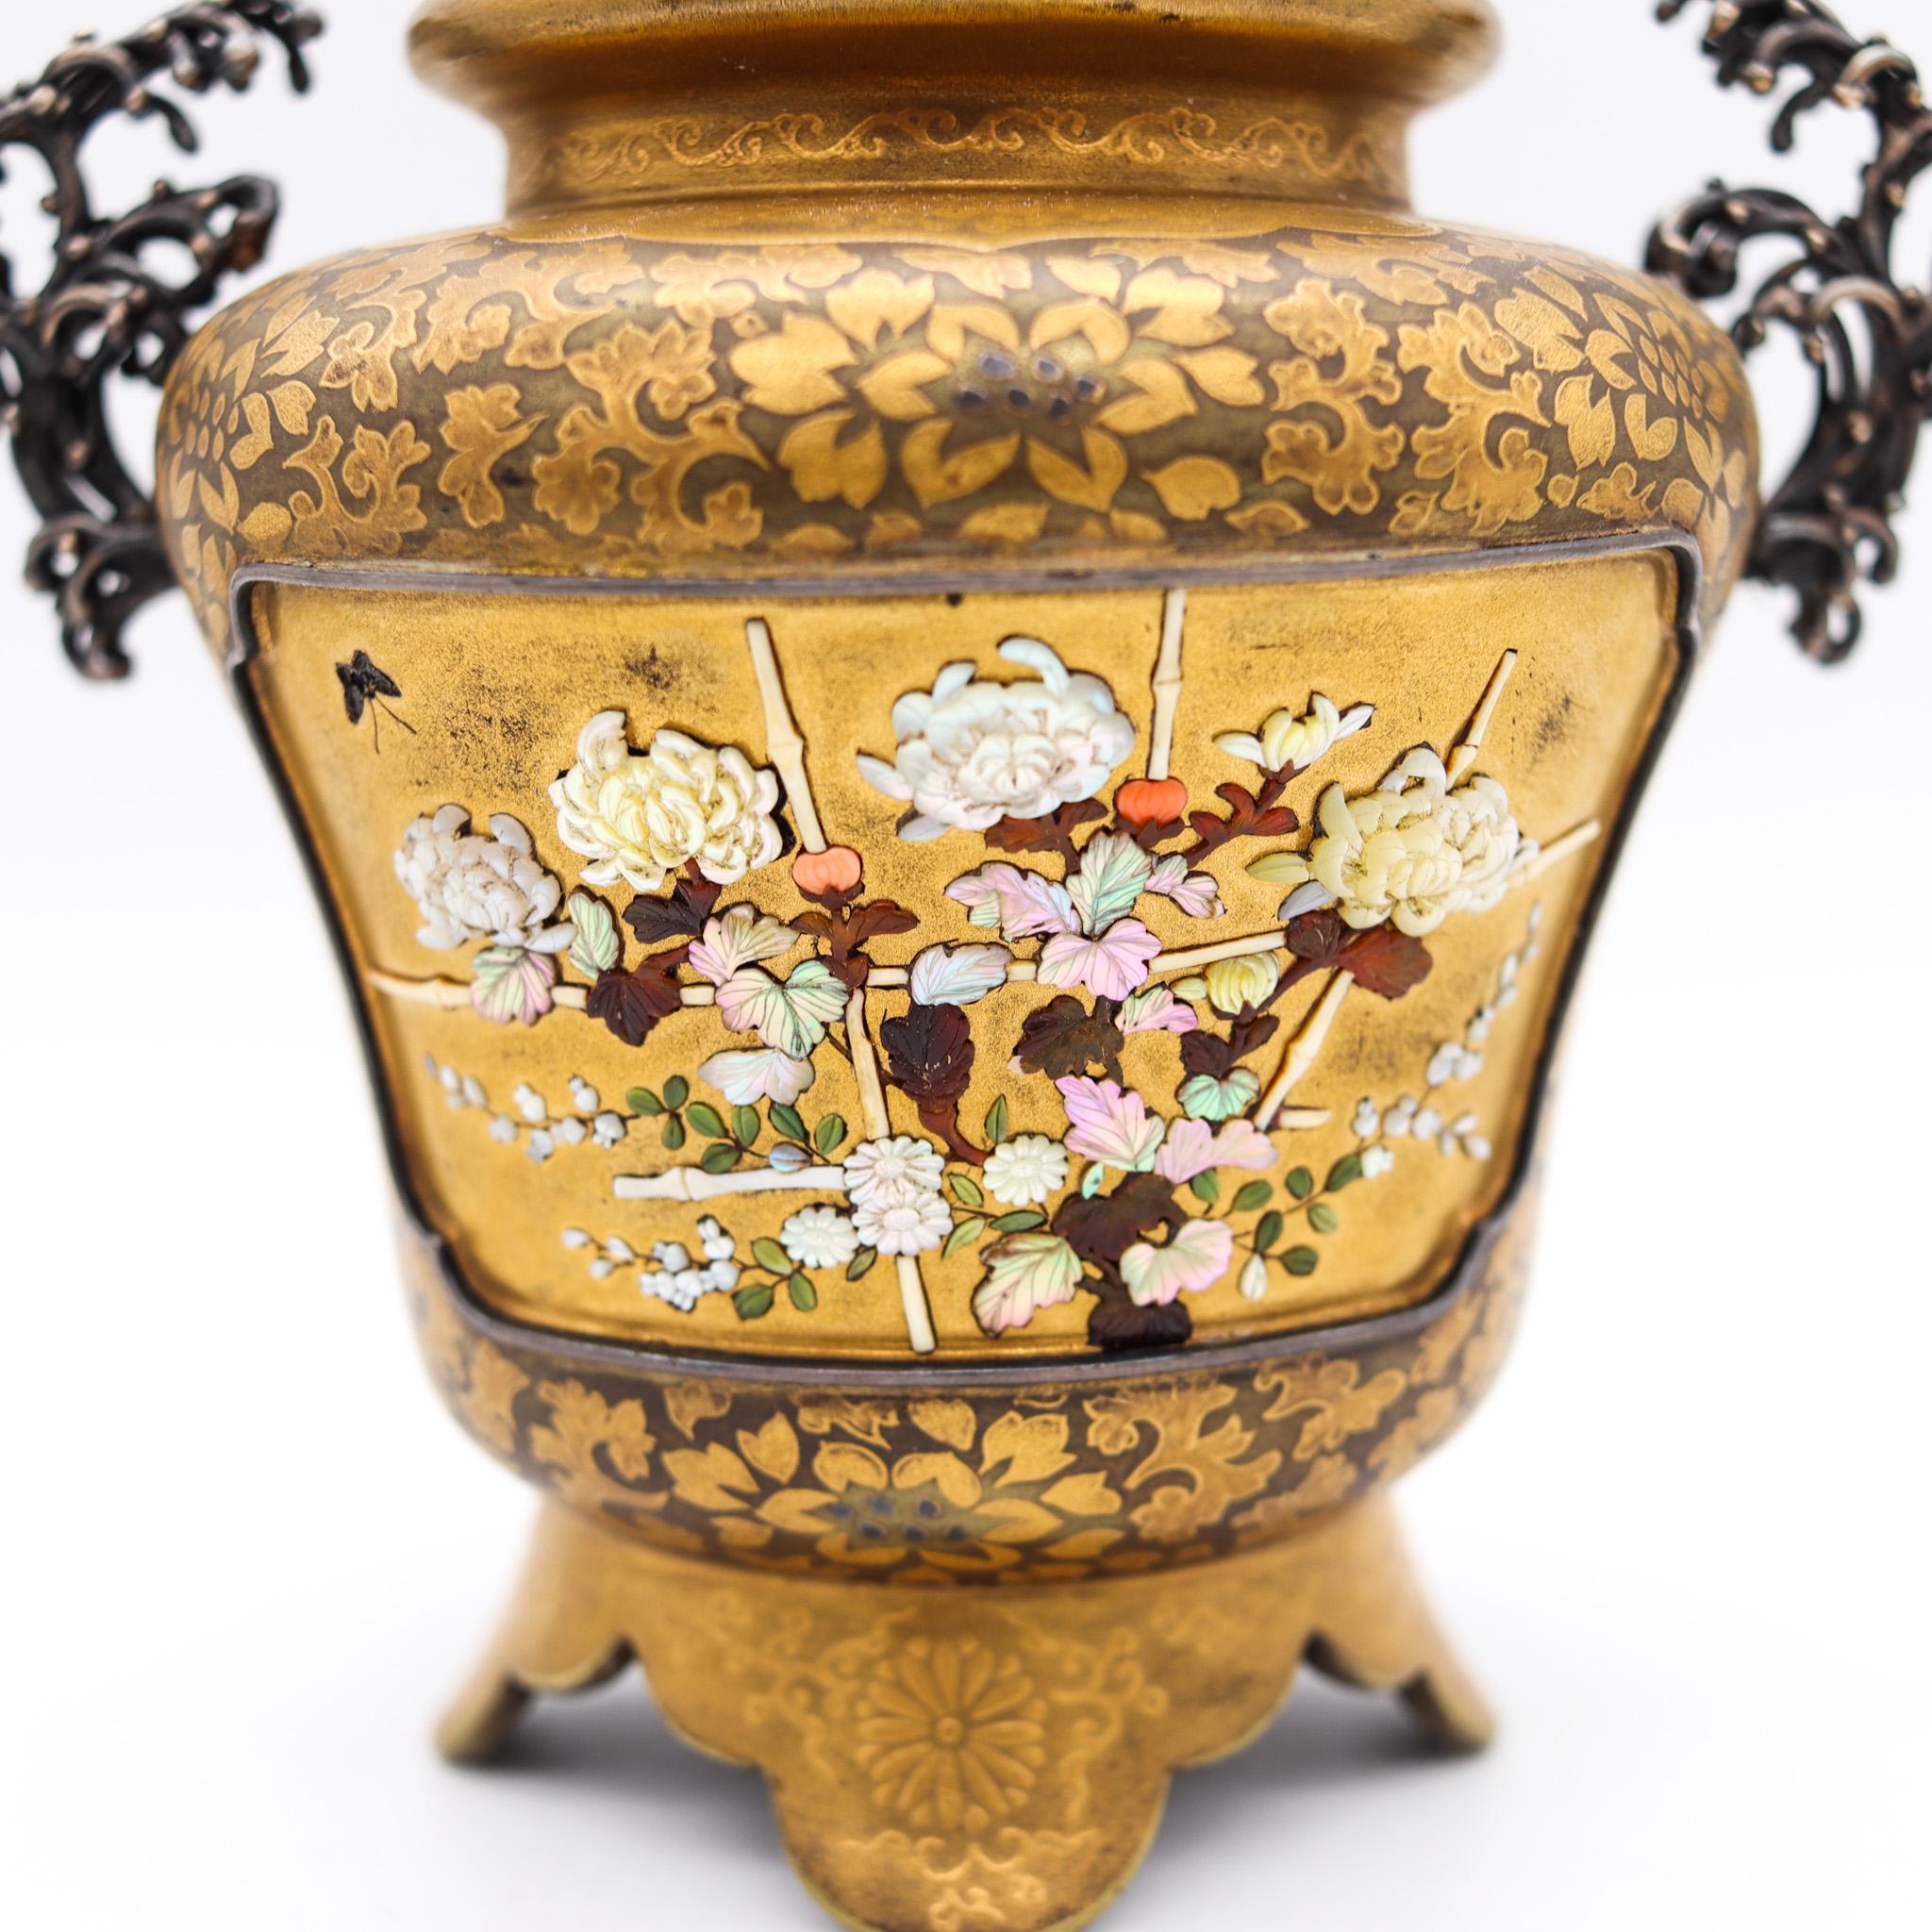 Shibayama urm from the Japan meiji (1858-1912) period.

Gorgeous piece of art, created in the imperial Japan during the Meiji period, circa 1890. This is a little urn with a lid crafted in gilded wood, shibayama panels and sterling silver.